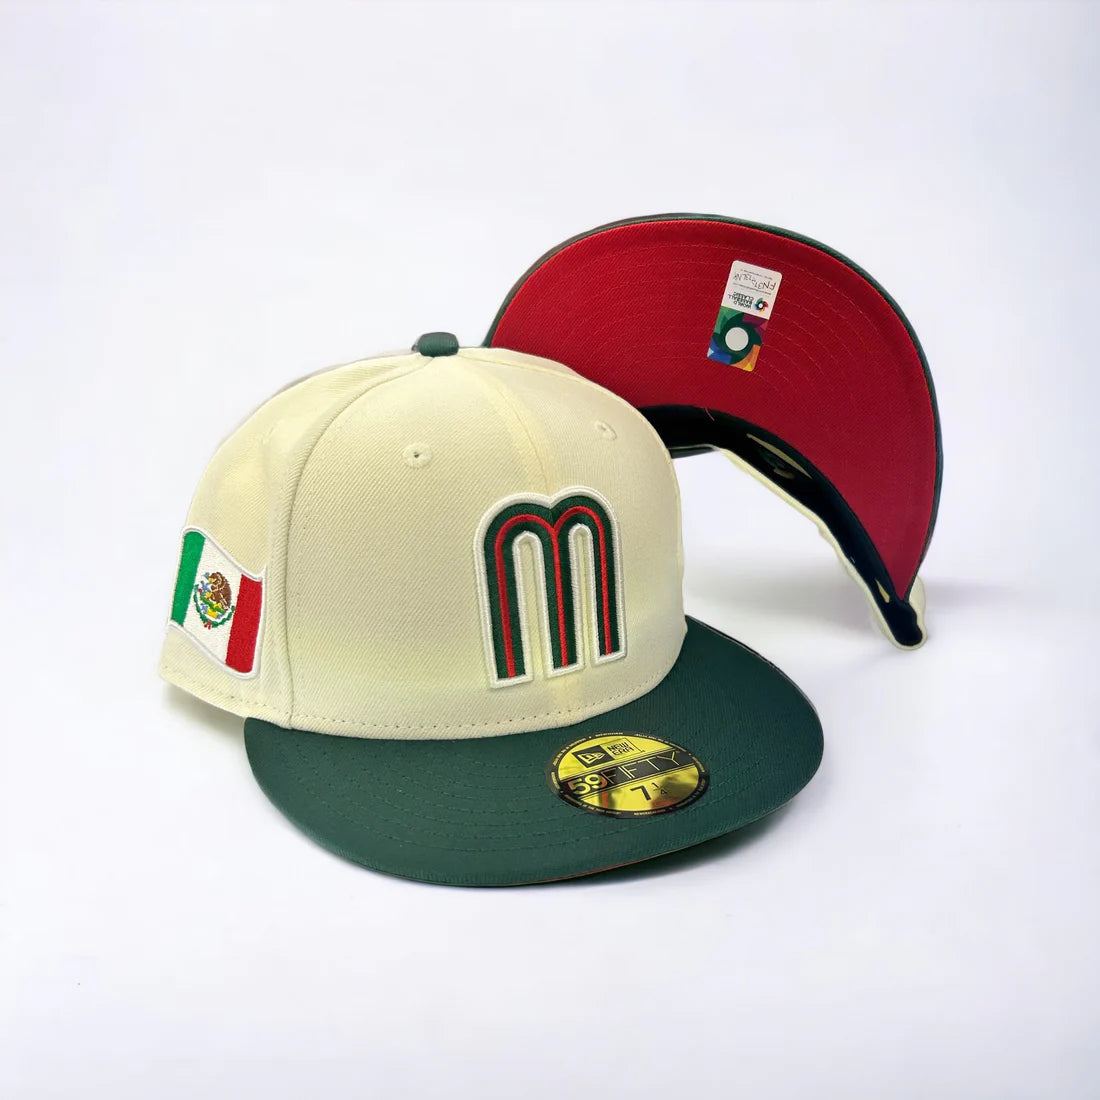 Chrome and dark Green Mexico New Era Fitted Hat - BeisbolMXShop